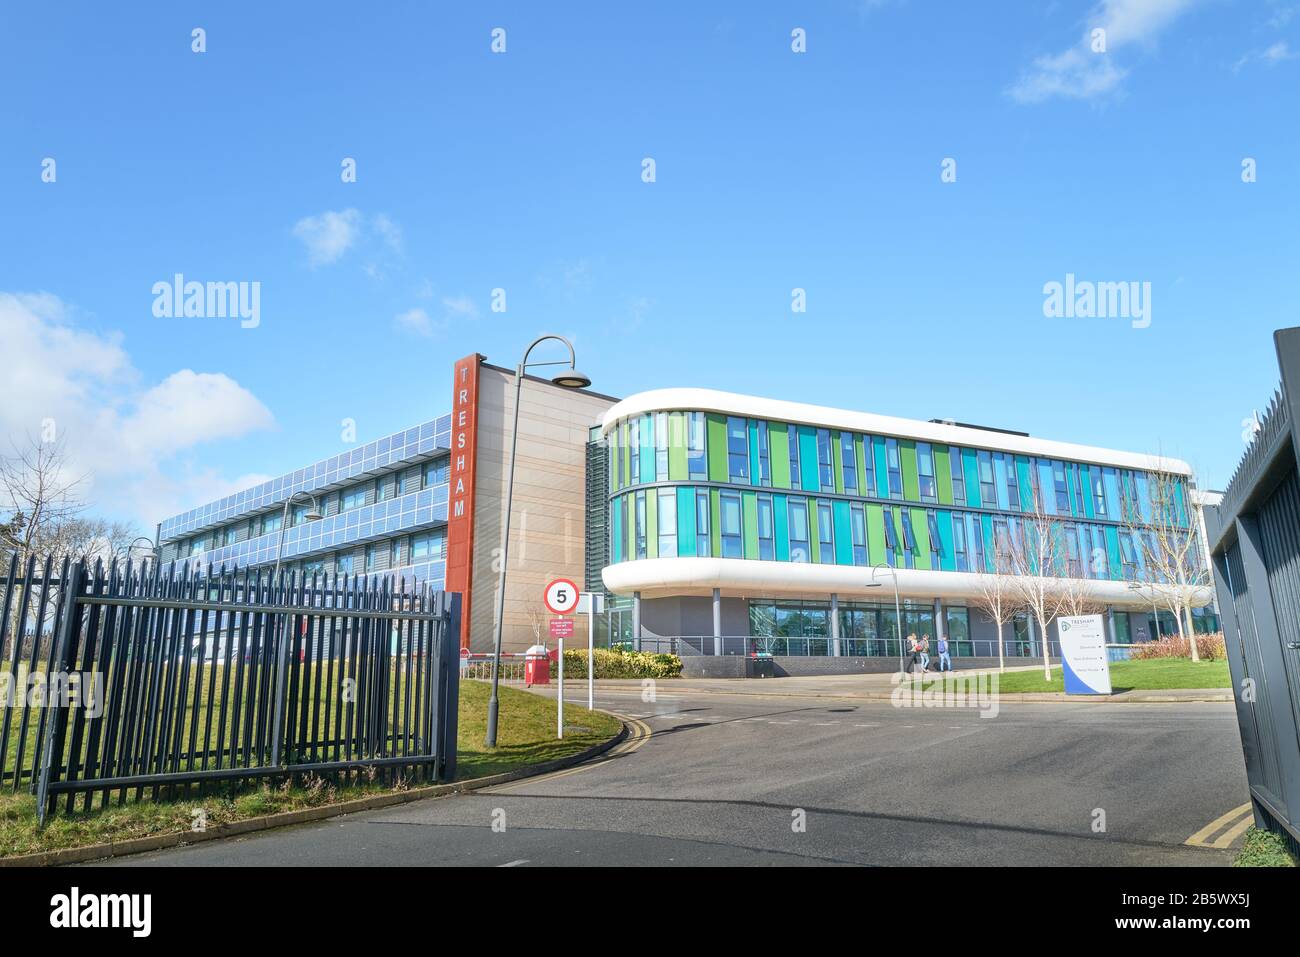 Driveway to Tresham college building at Corby, Northamptonshire, England, on a sunny winter day. Stock Photo